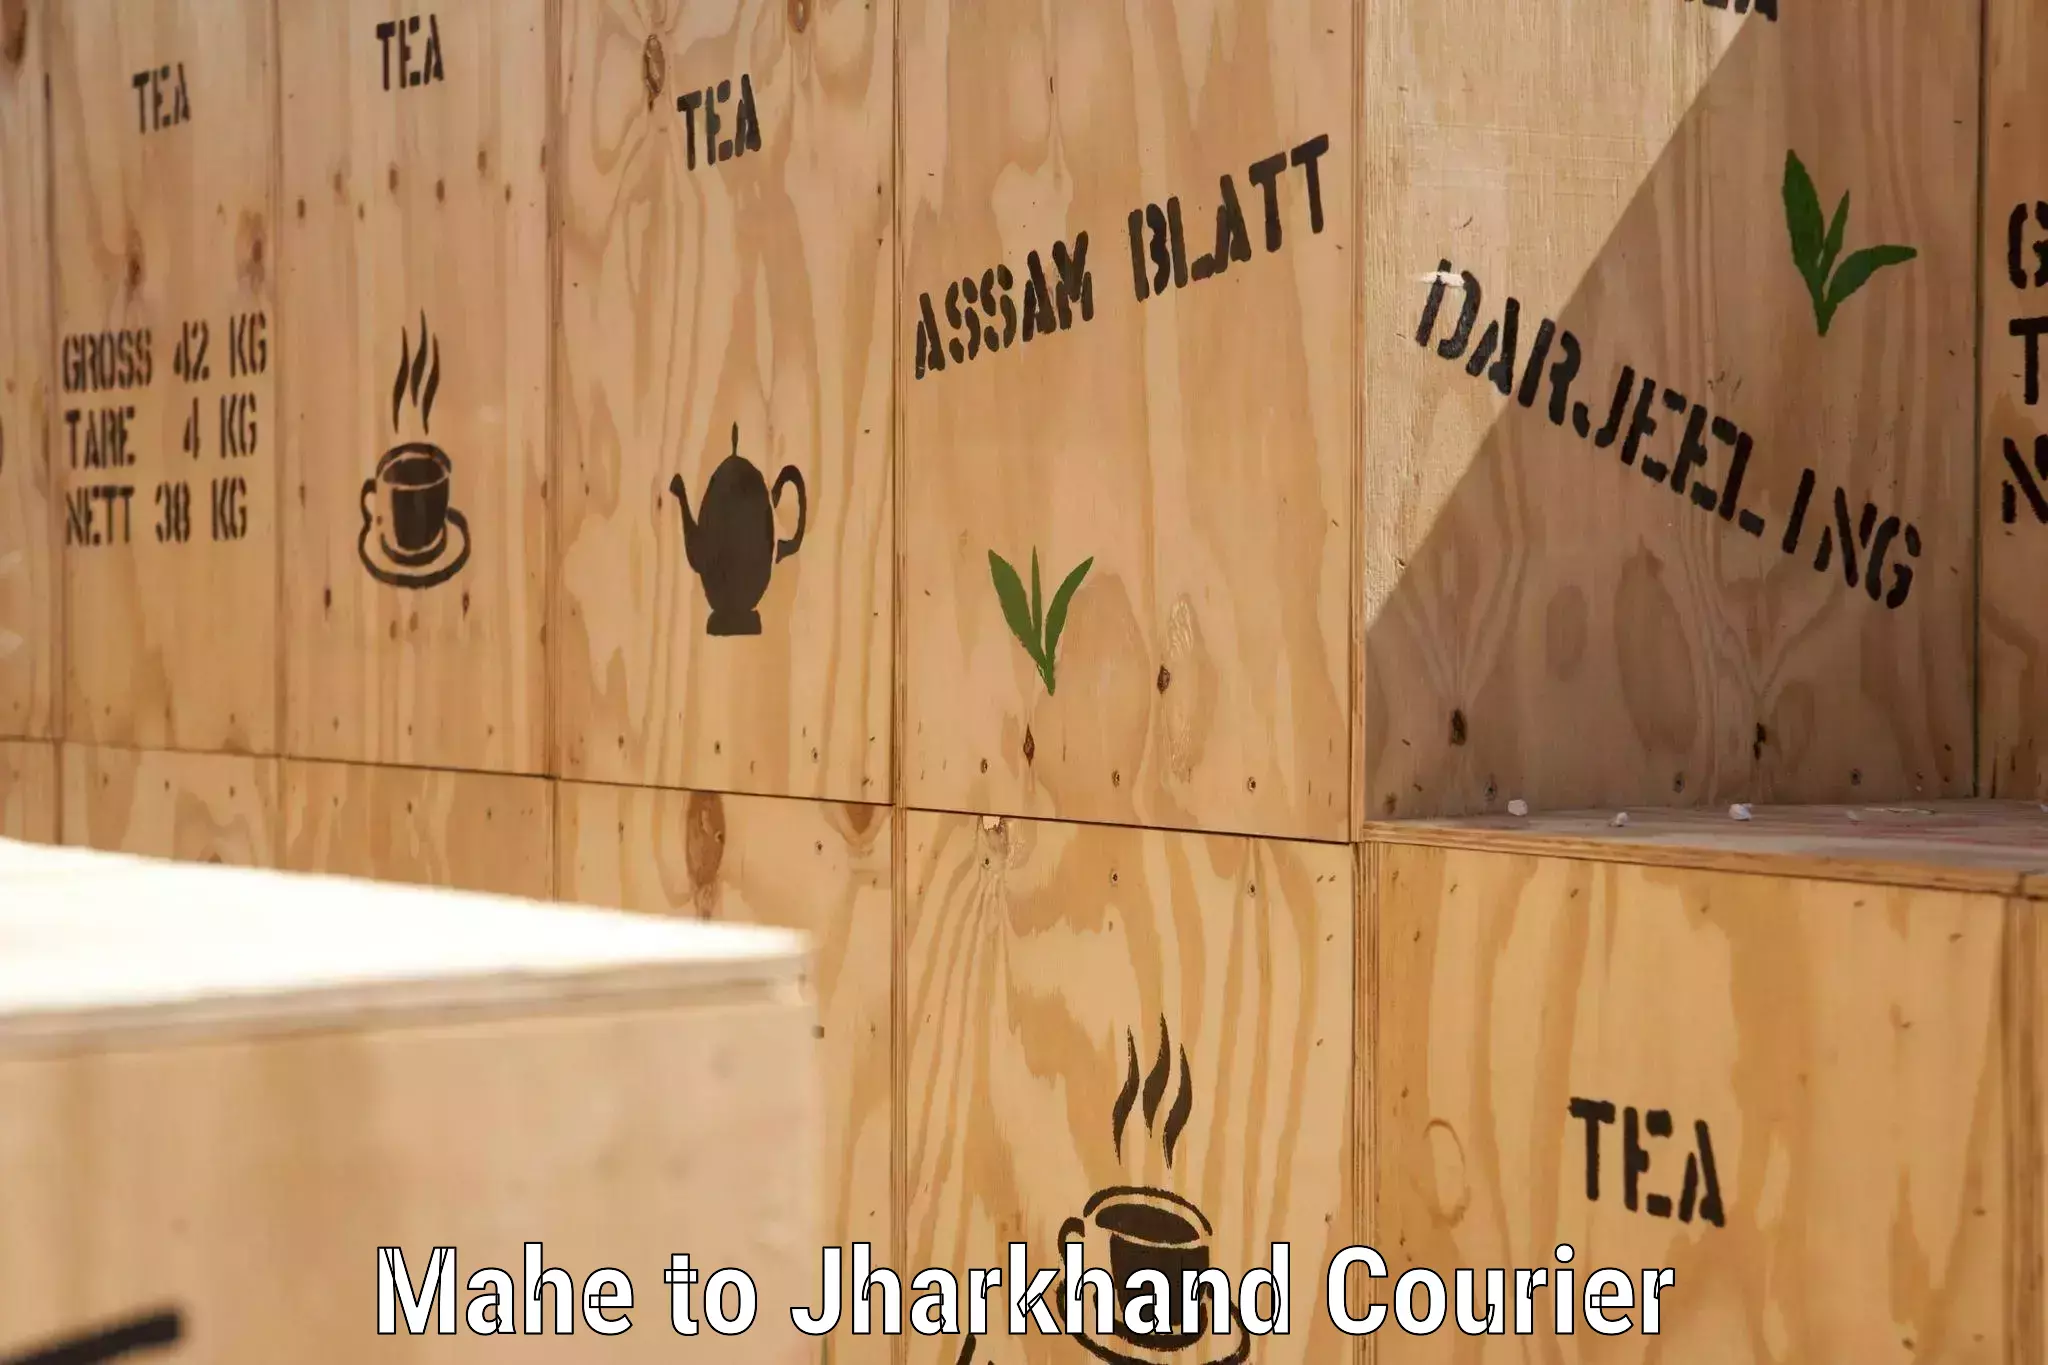 Domestic courier Mahe to Jamshedpur